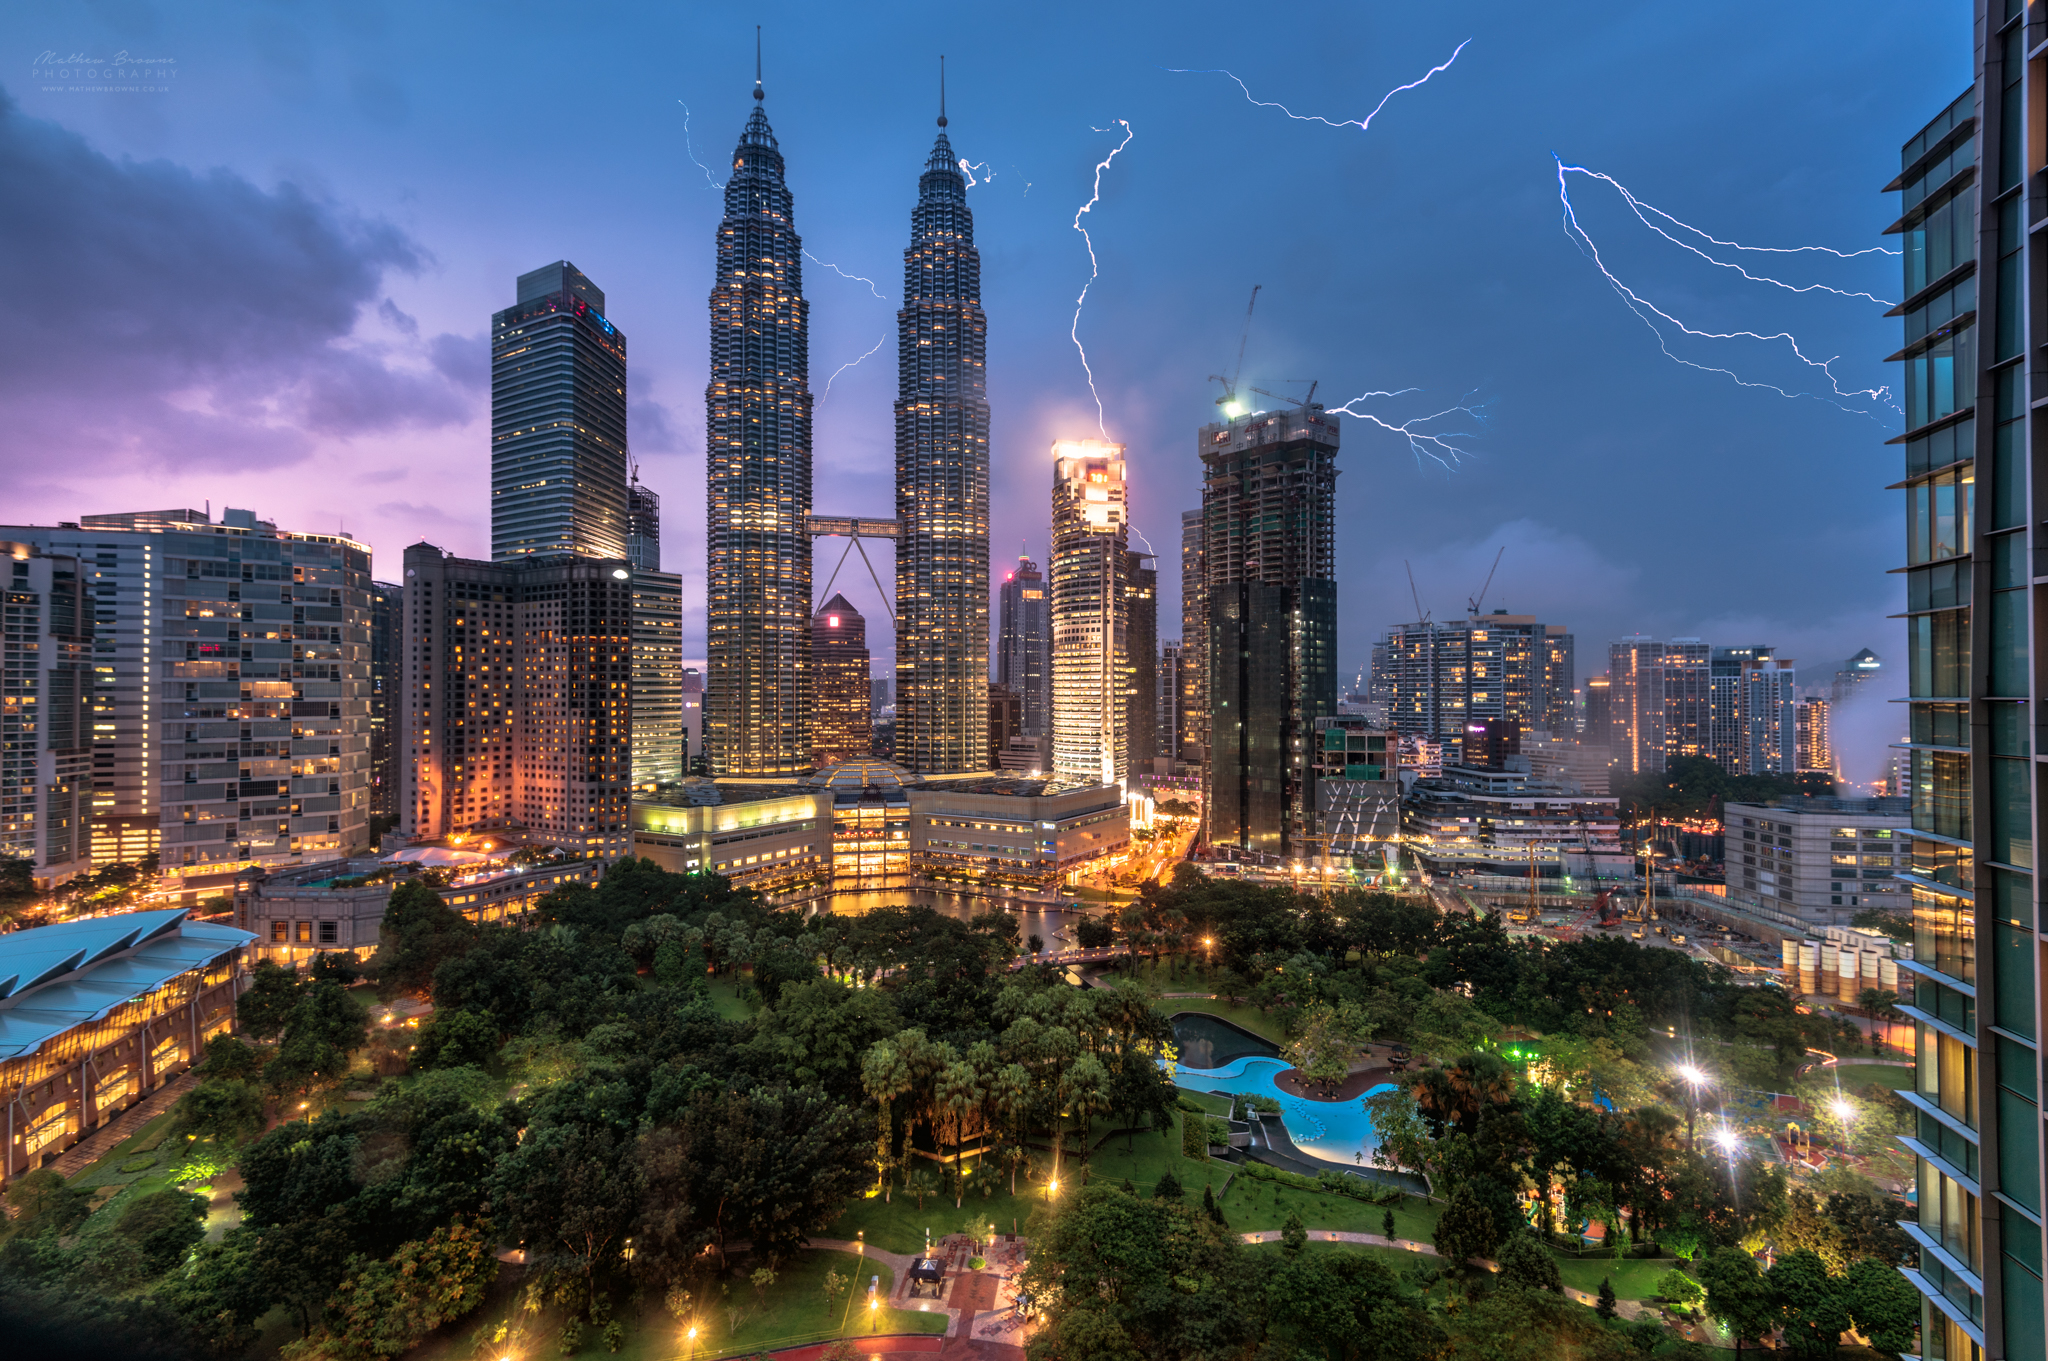 Petronas Twin Towers, Malaysia - Top 10 spots for photography